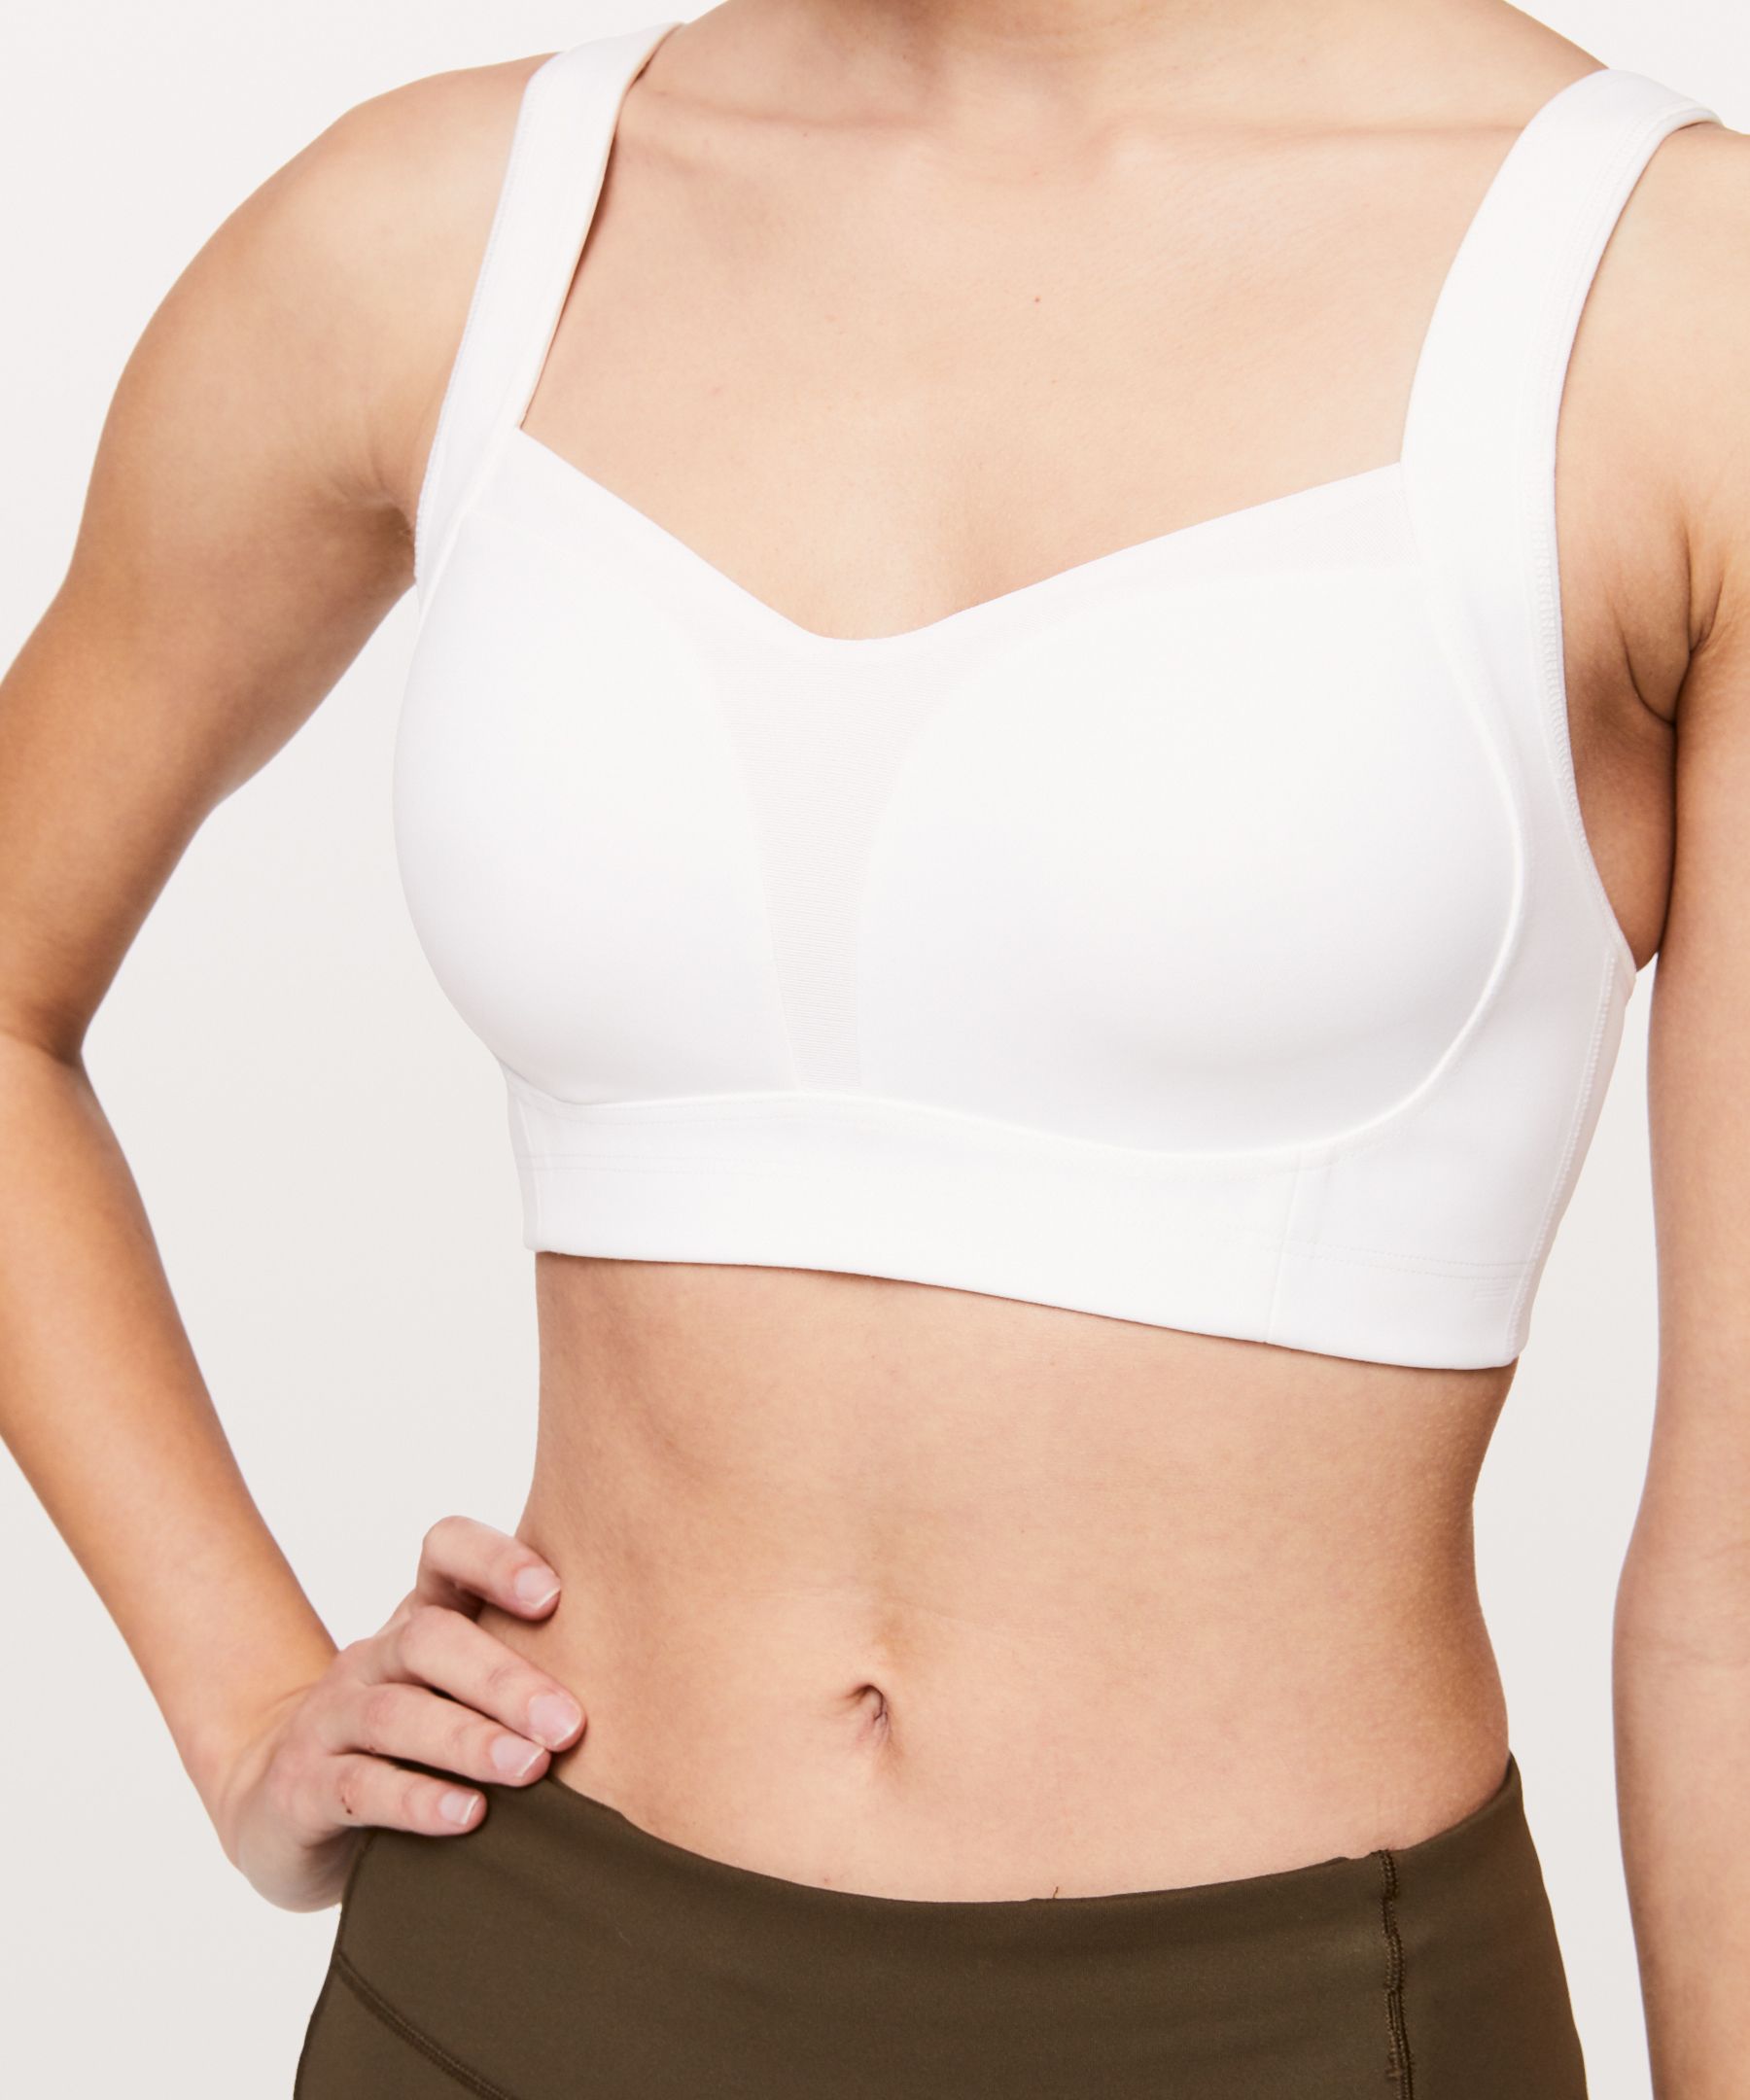 Lululemon Tata tamer sports bra Size undefined - $16 - From Holly